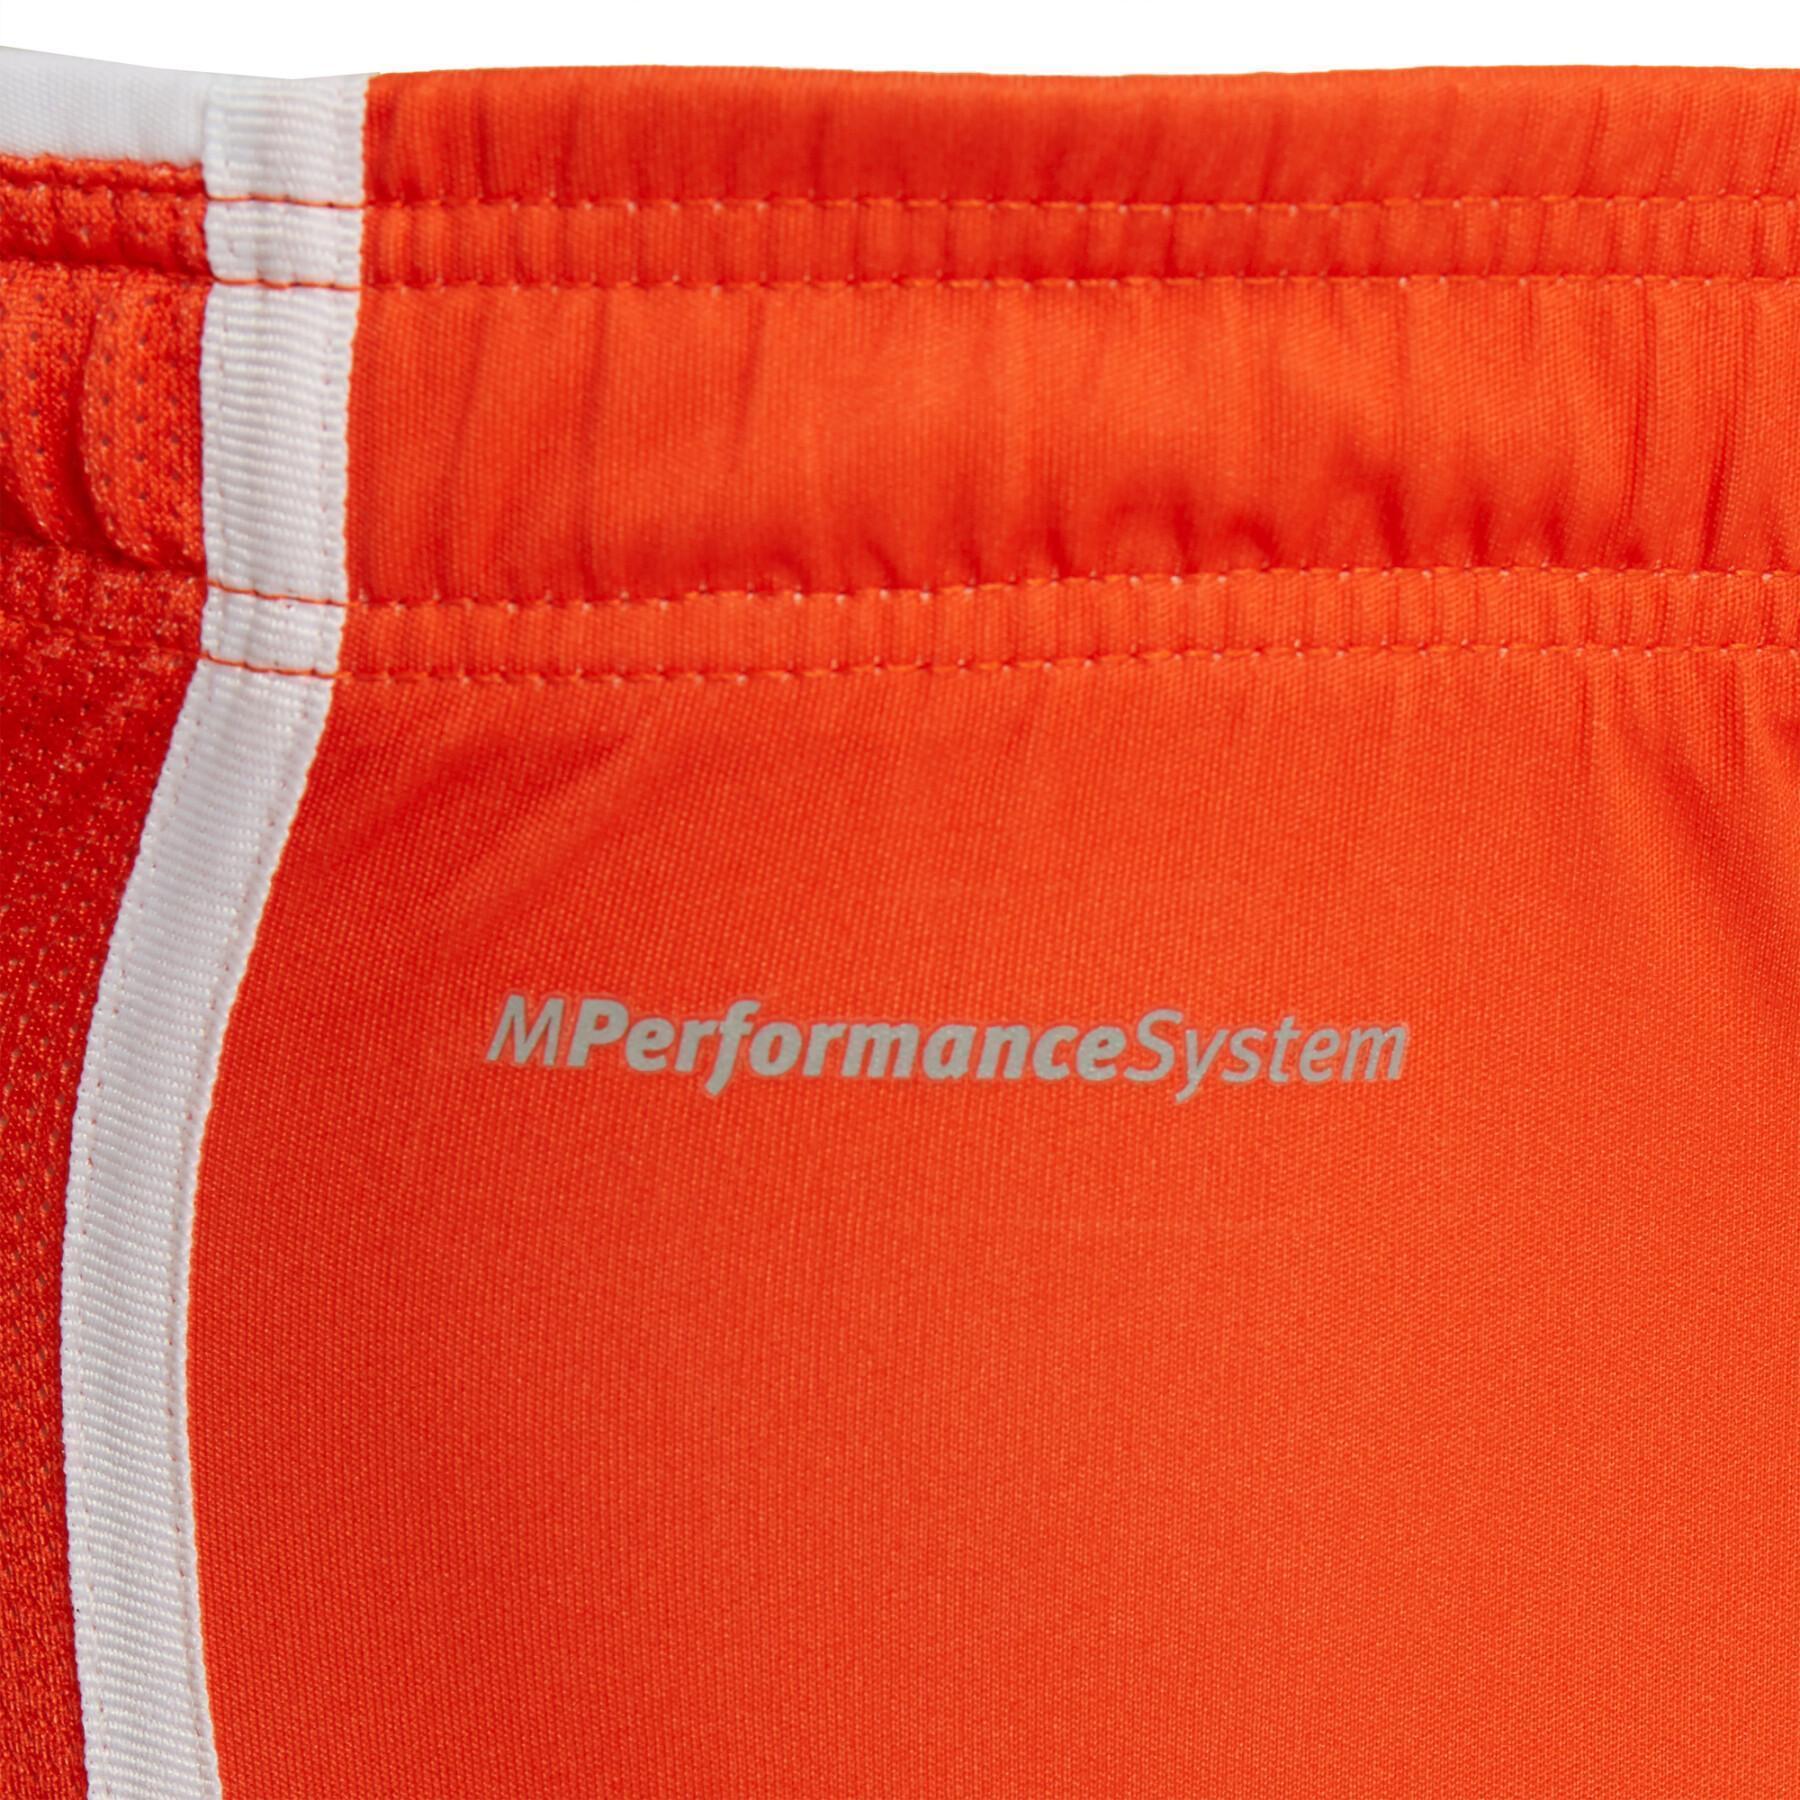 Outdoor-Shorts SPAL 2013 18/19